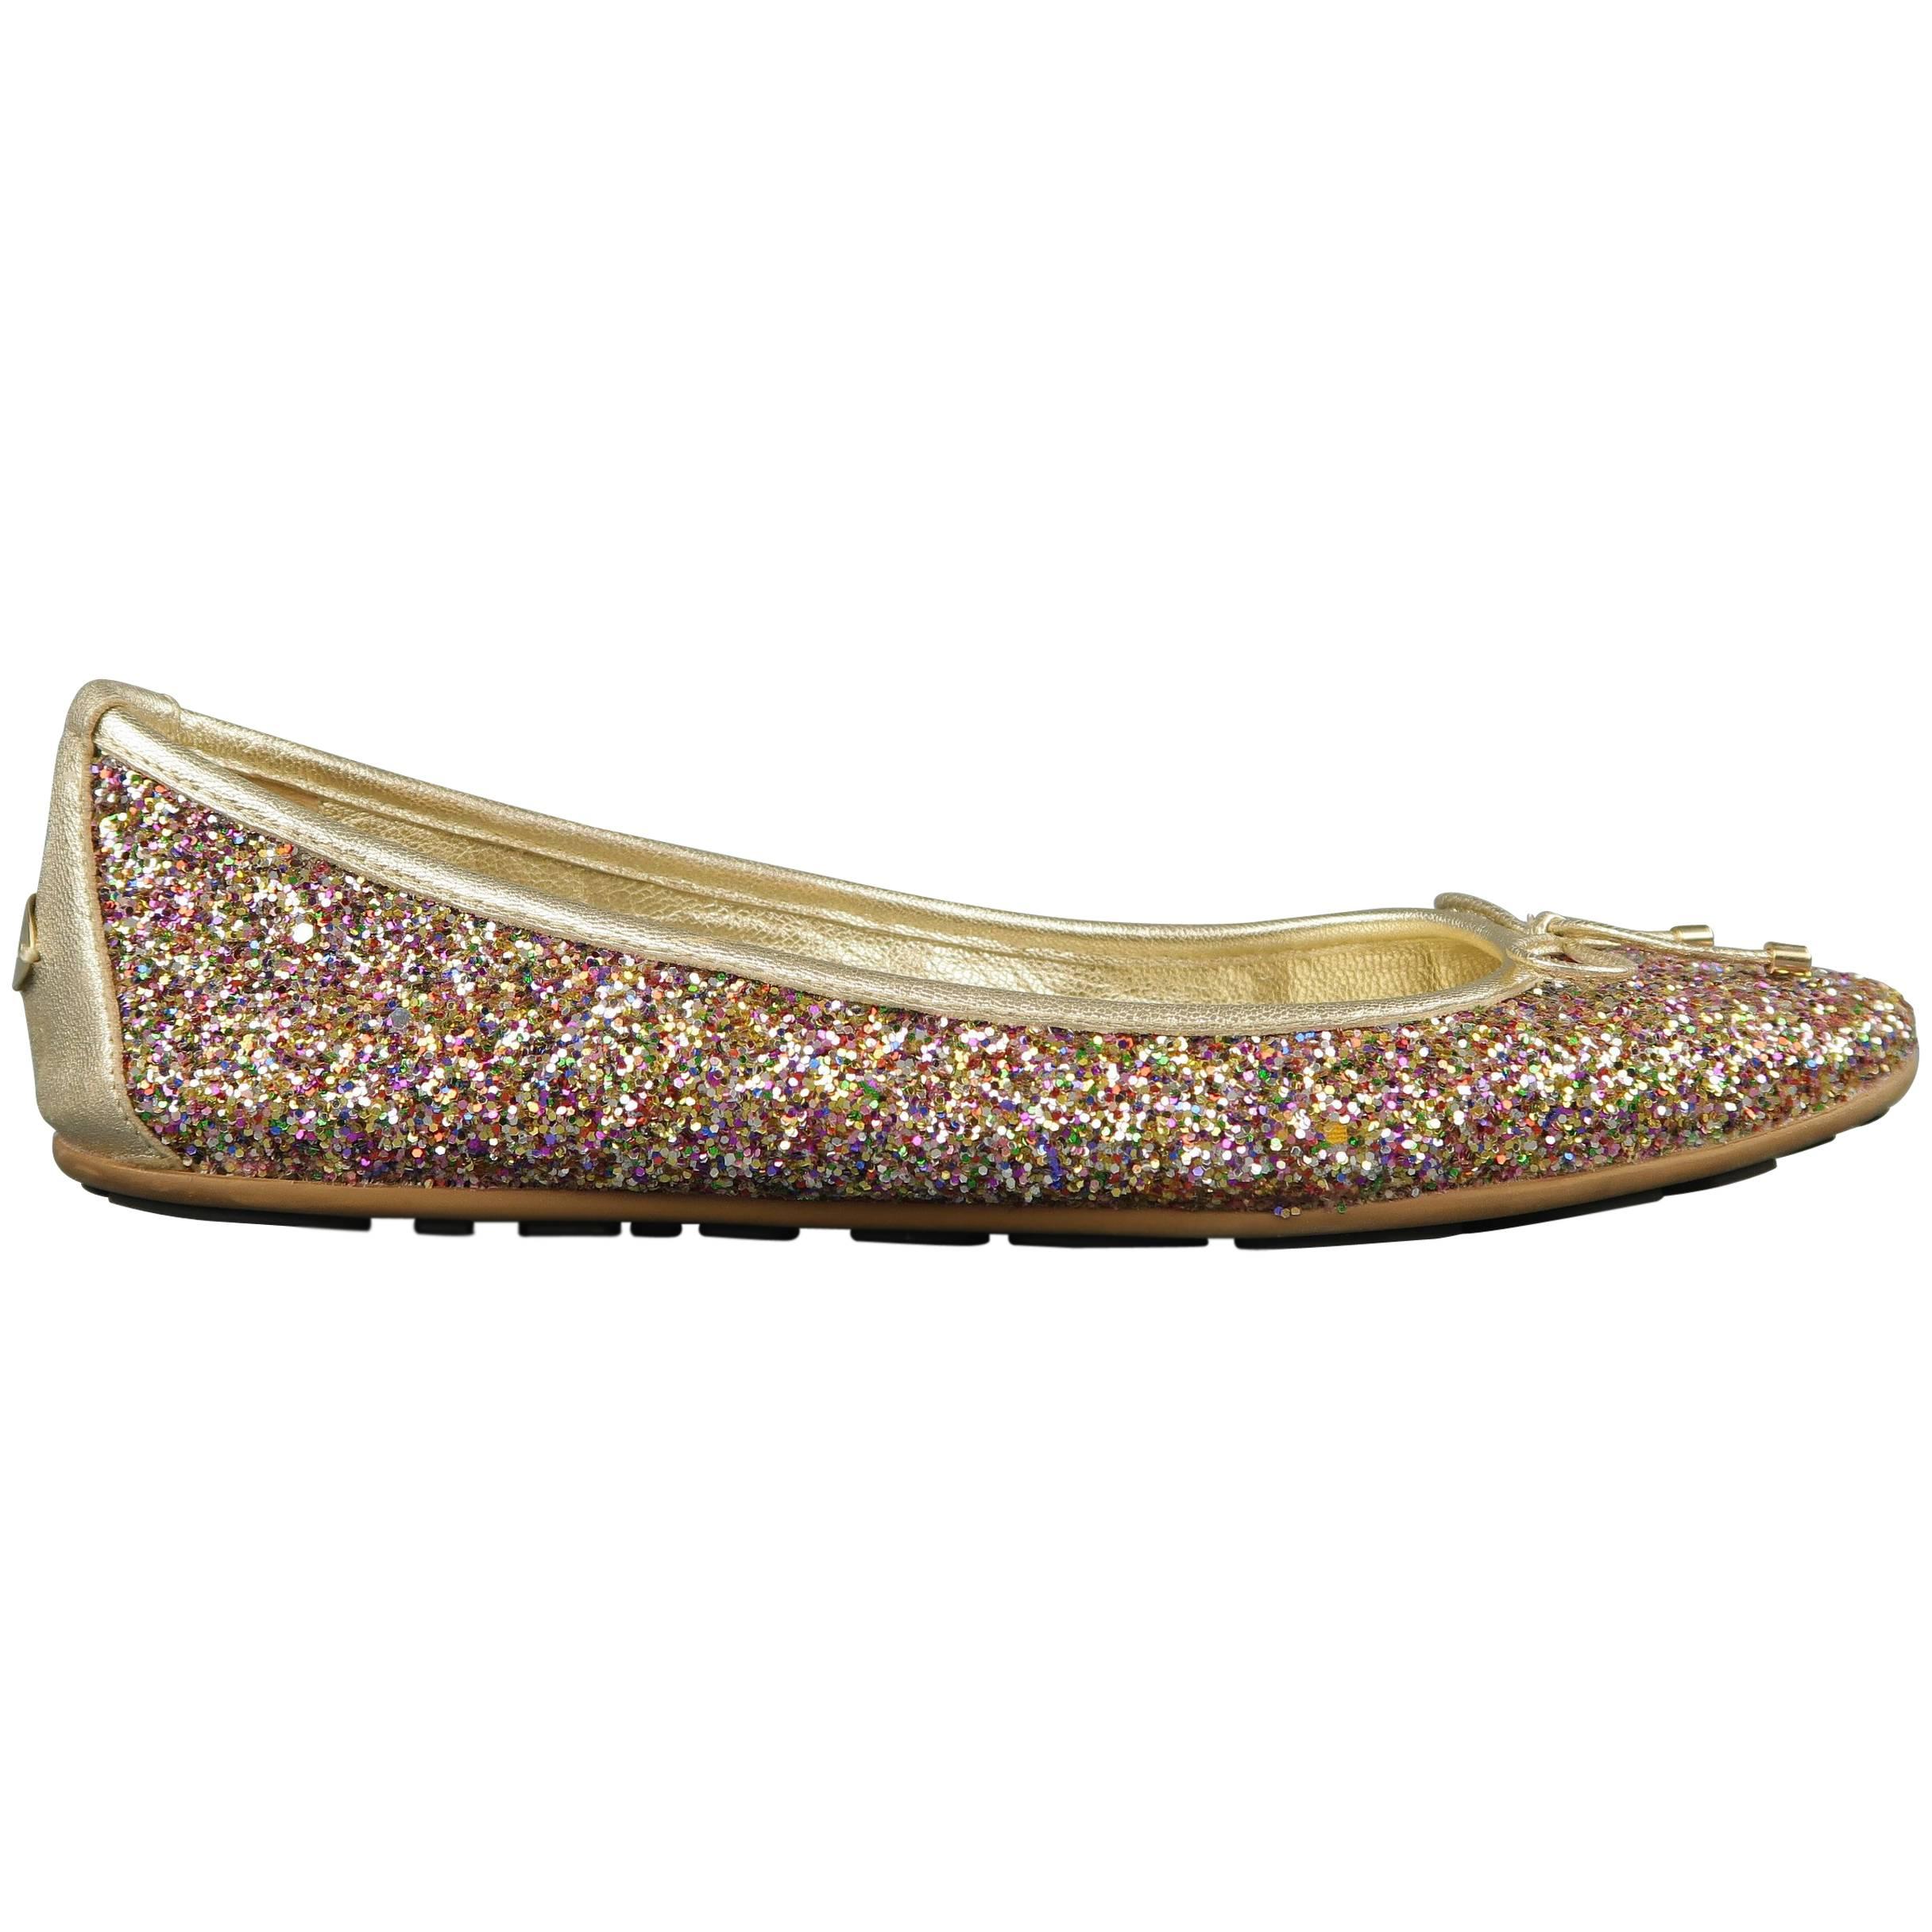 JIMMY CHOO Size 8 Gold Leather Multi Color Glitter Ballet Flats